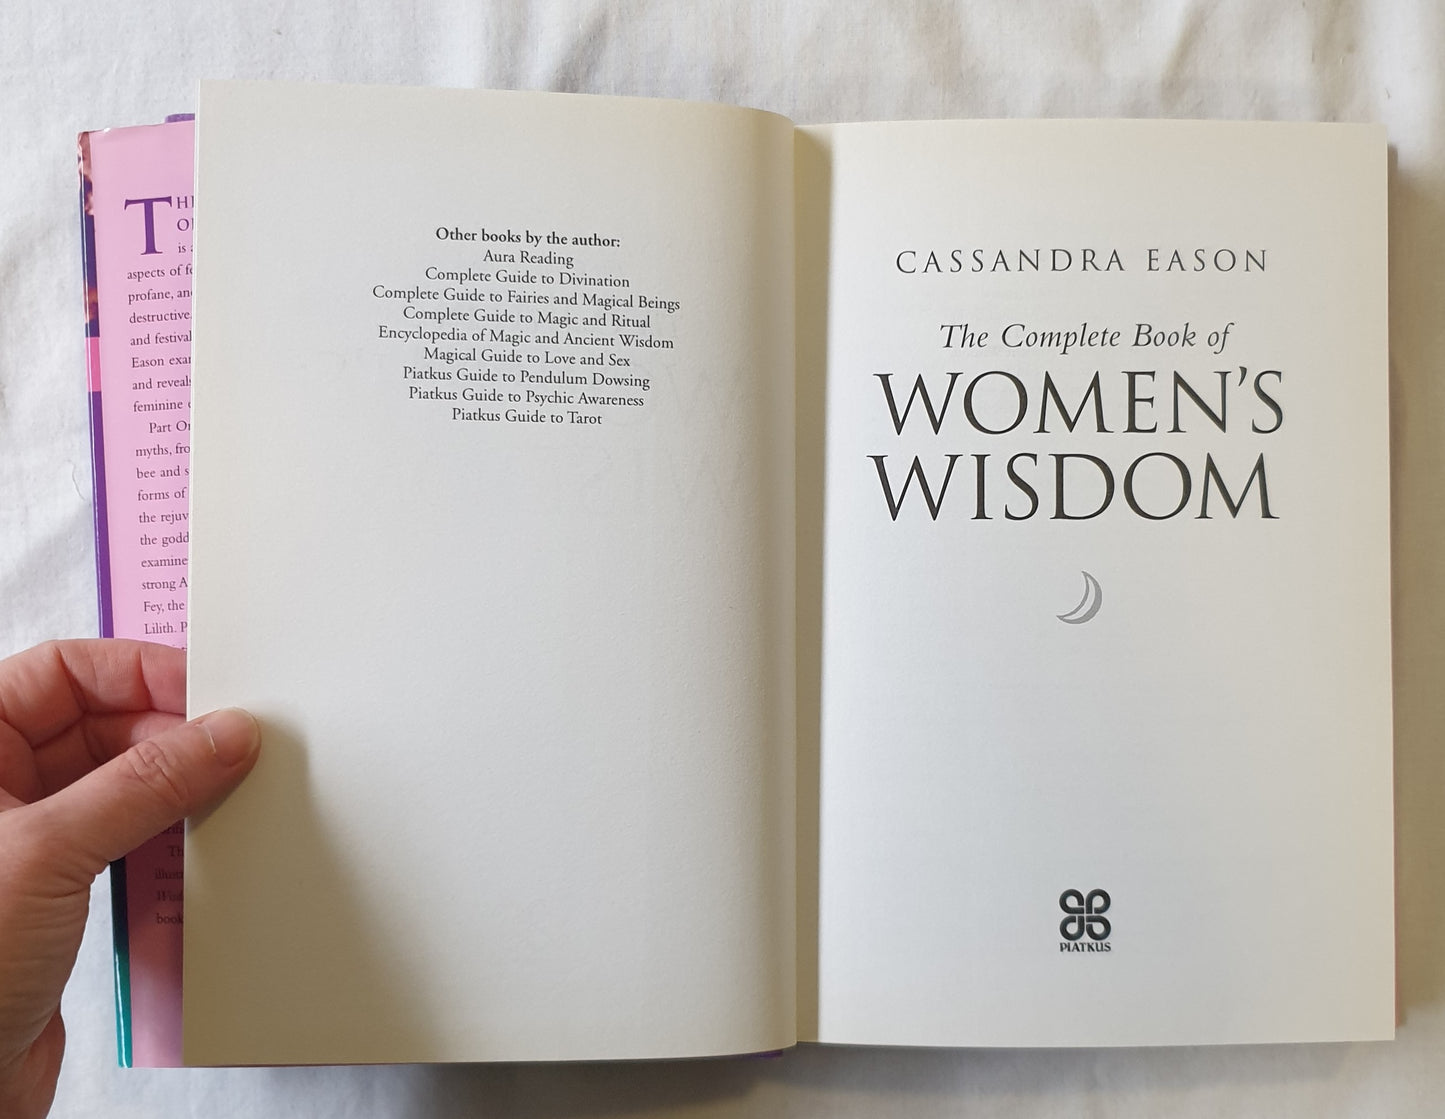 The Complete Book of Women's Wisdom by Cassandra Eason